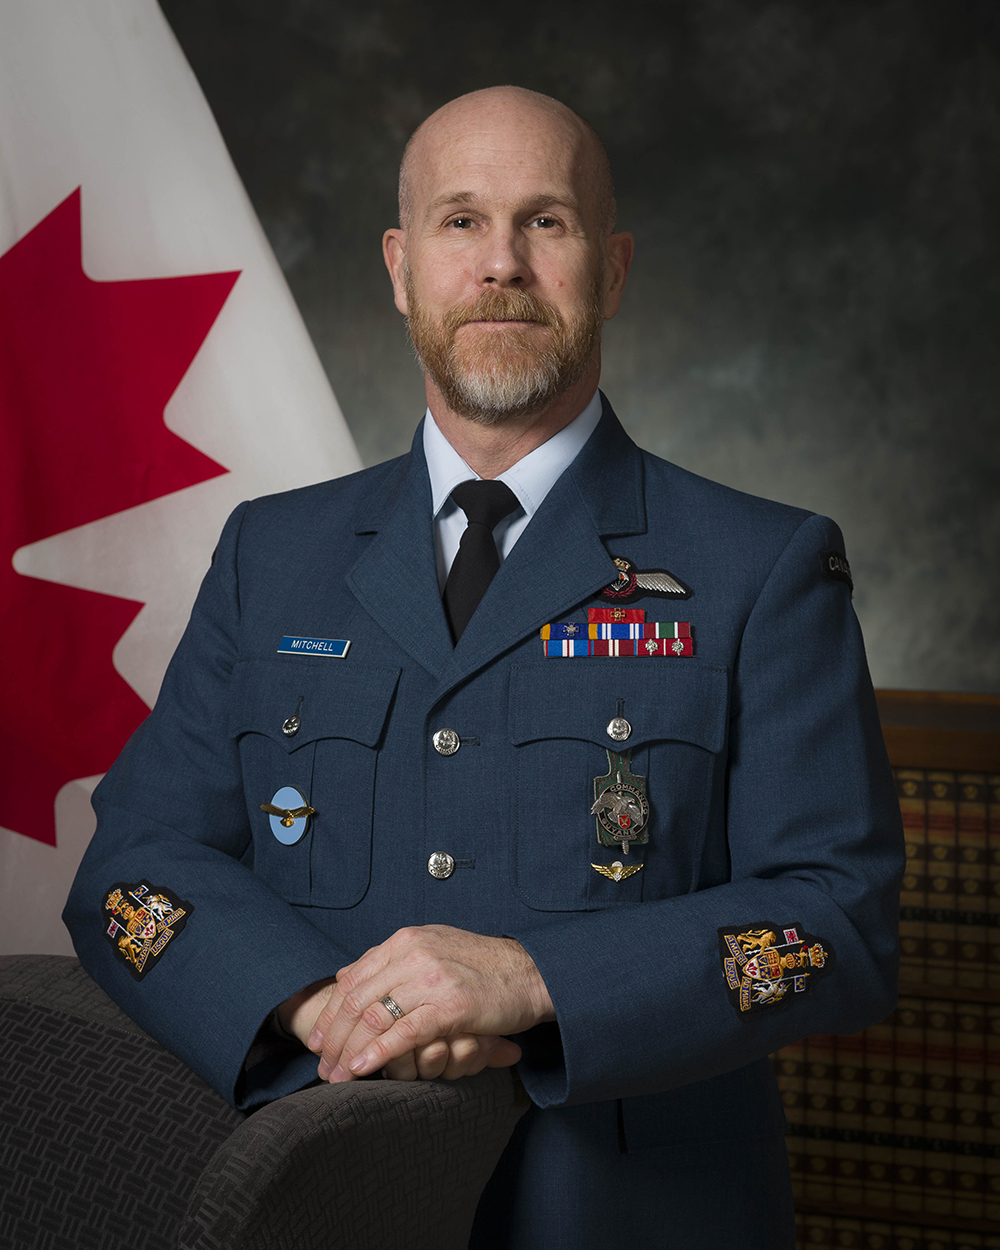 CWO Keith Mitchell is the RCAF Reserve Careers CWO. “Working for our RCAF Reserve NCMs, helping shape their future, is both a privilege and an honour,” he says. 